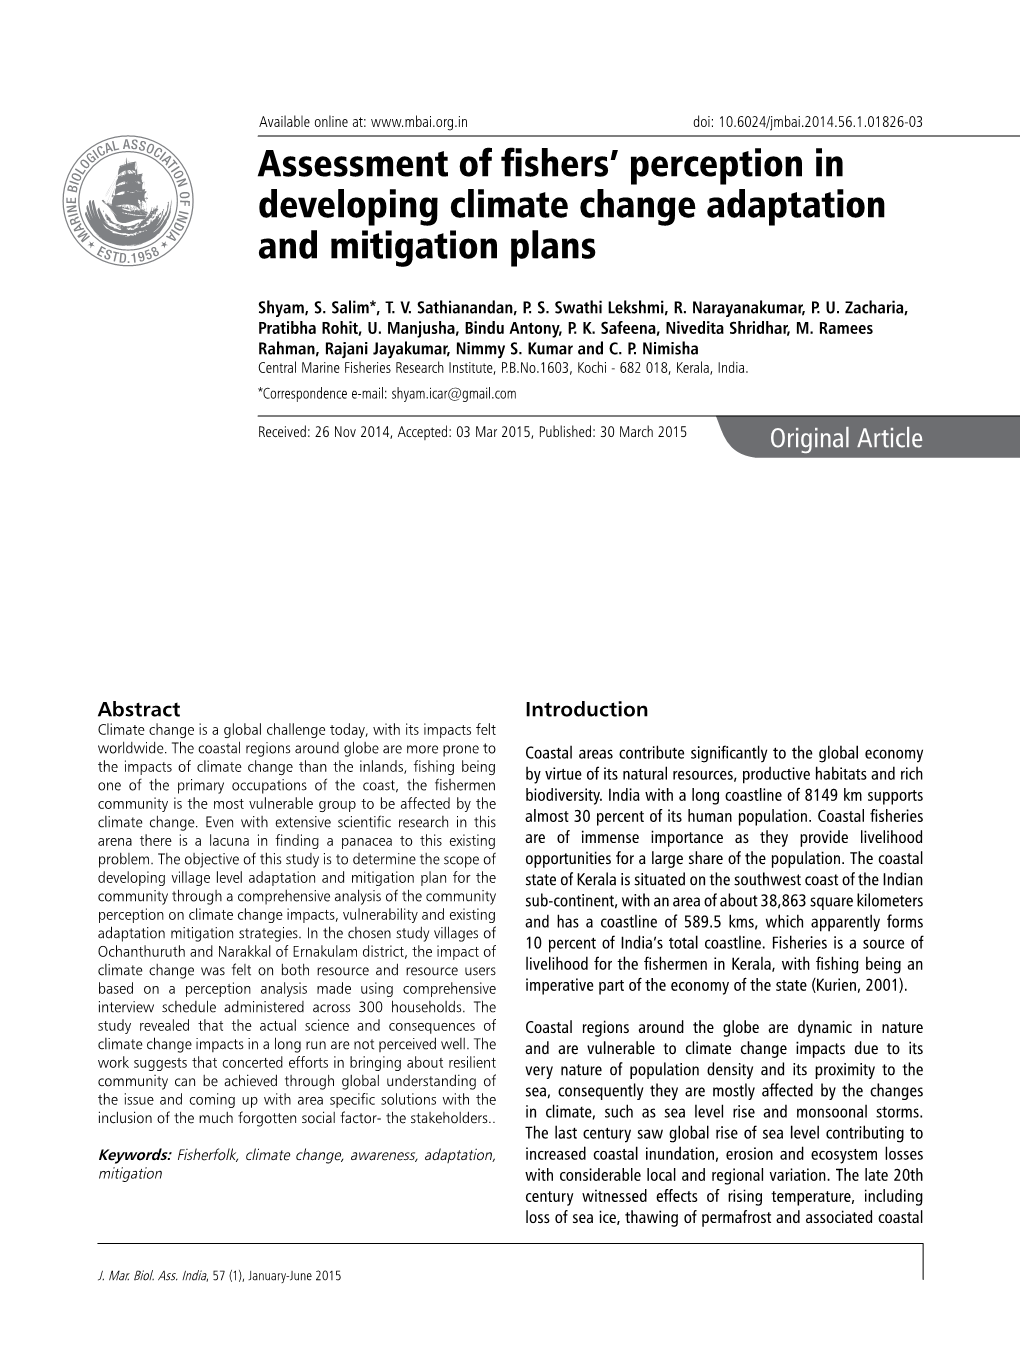 Assessment of Fishers' Perception in Developing Climate Change